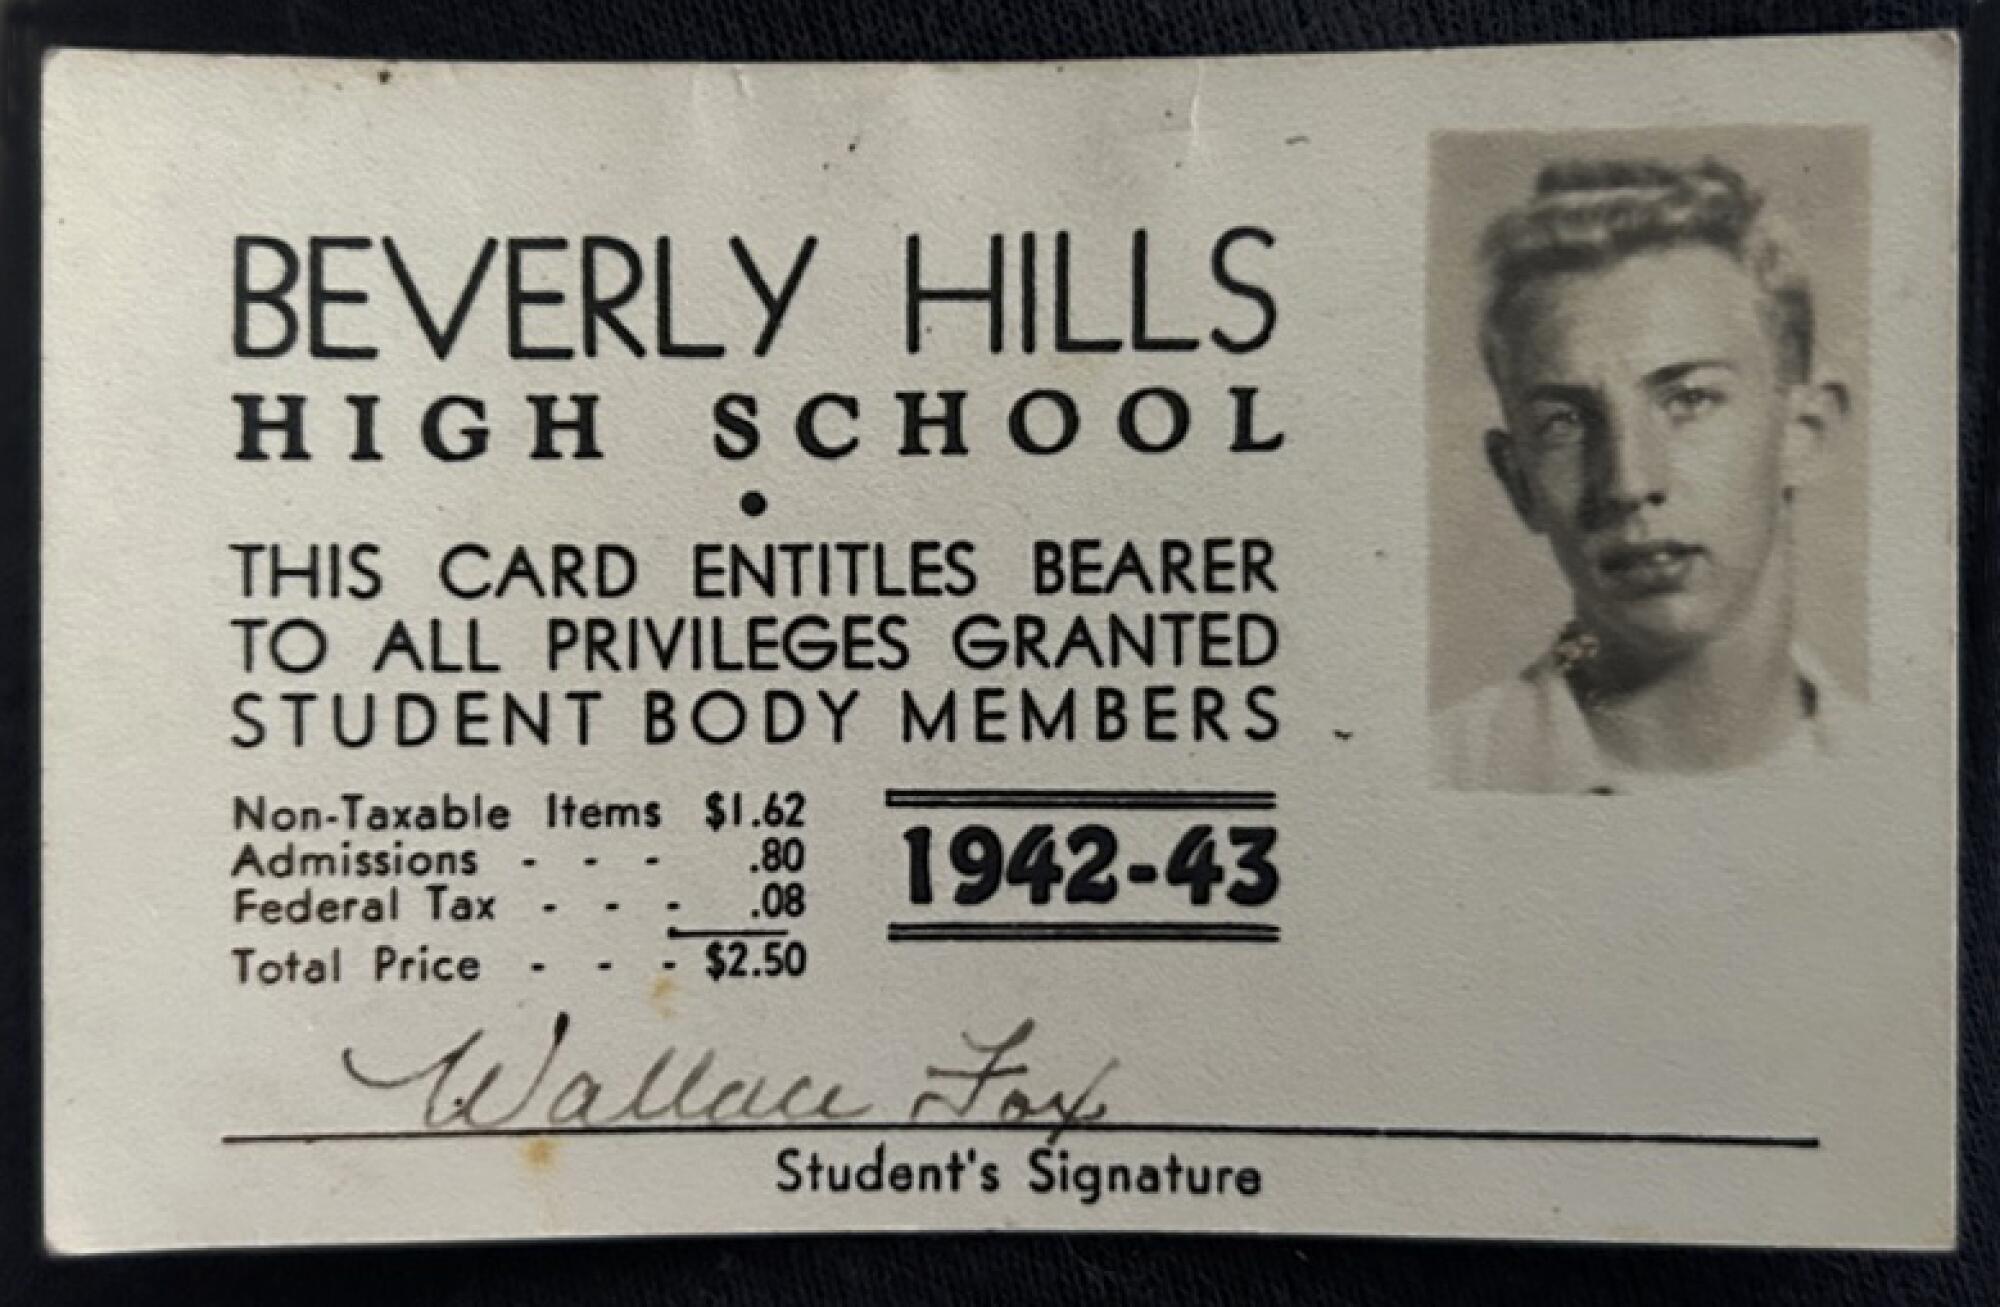 A Beverly Hills High School student ID card for Wallace Fox, from the 1942-43 school year.